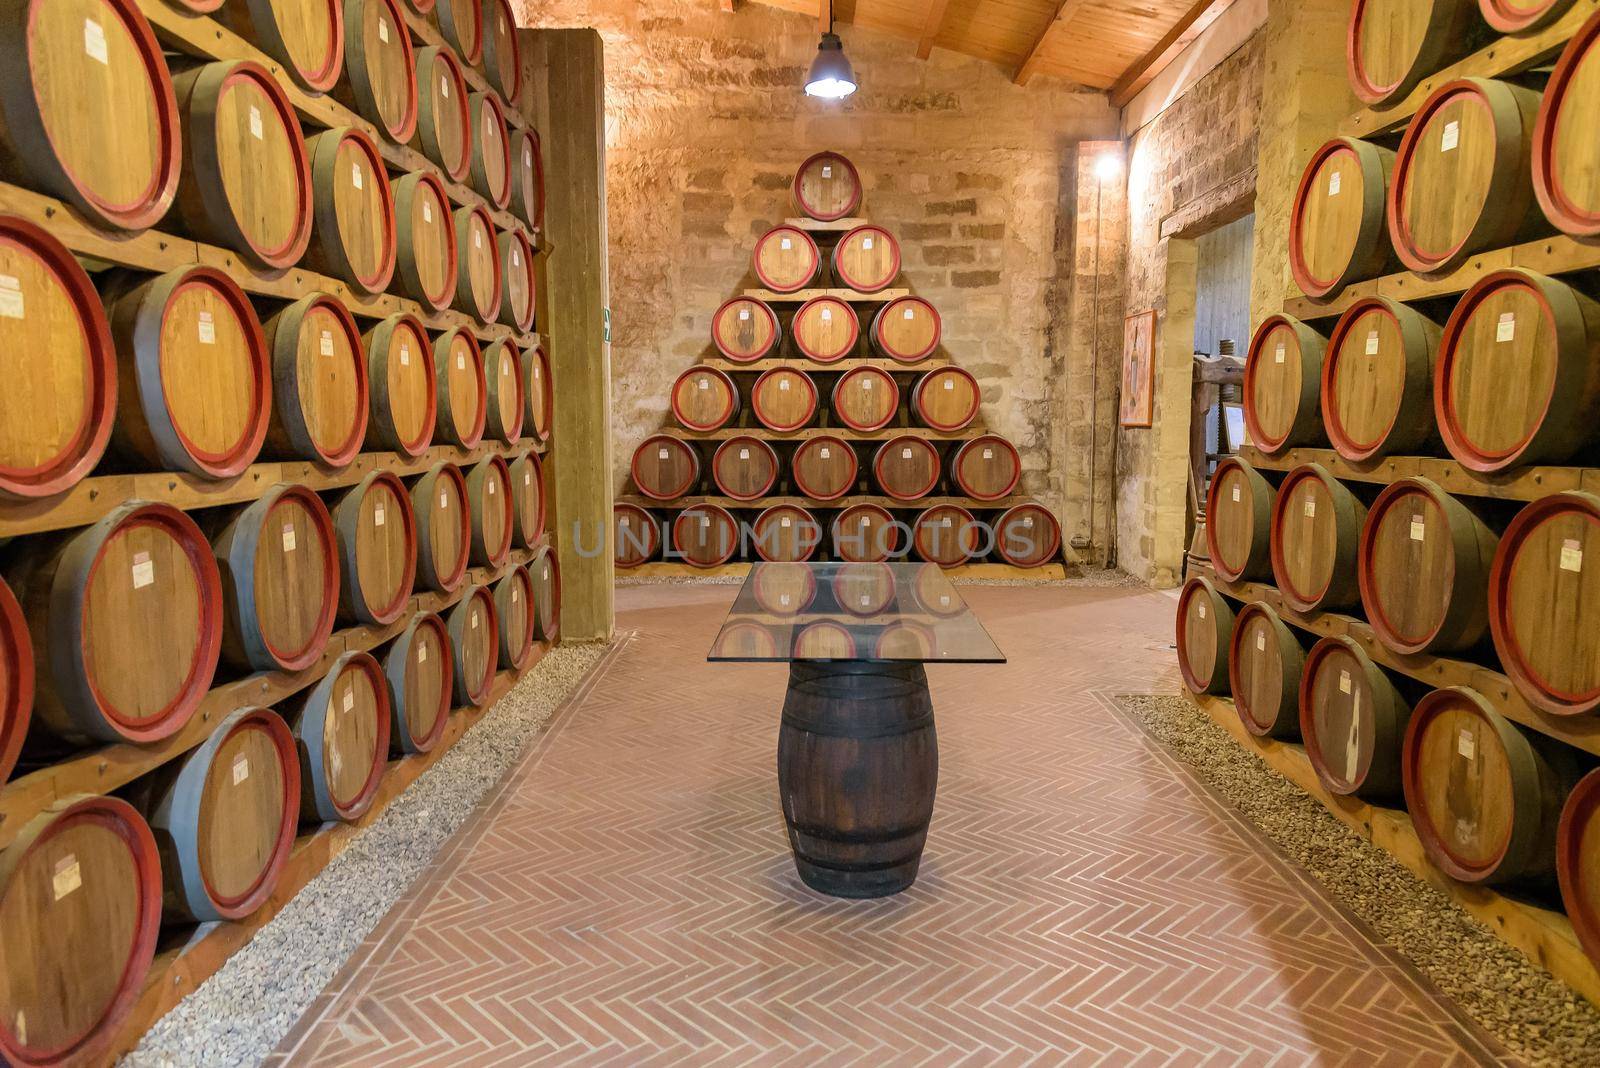 Wooden barrels and a table in a wine cellar